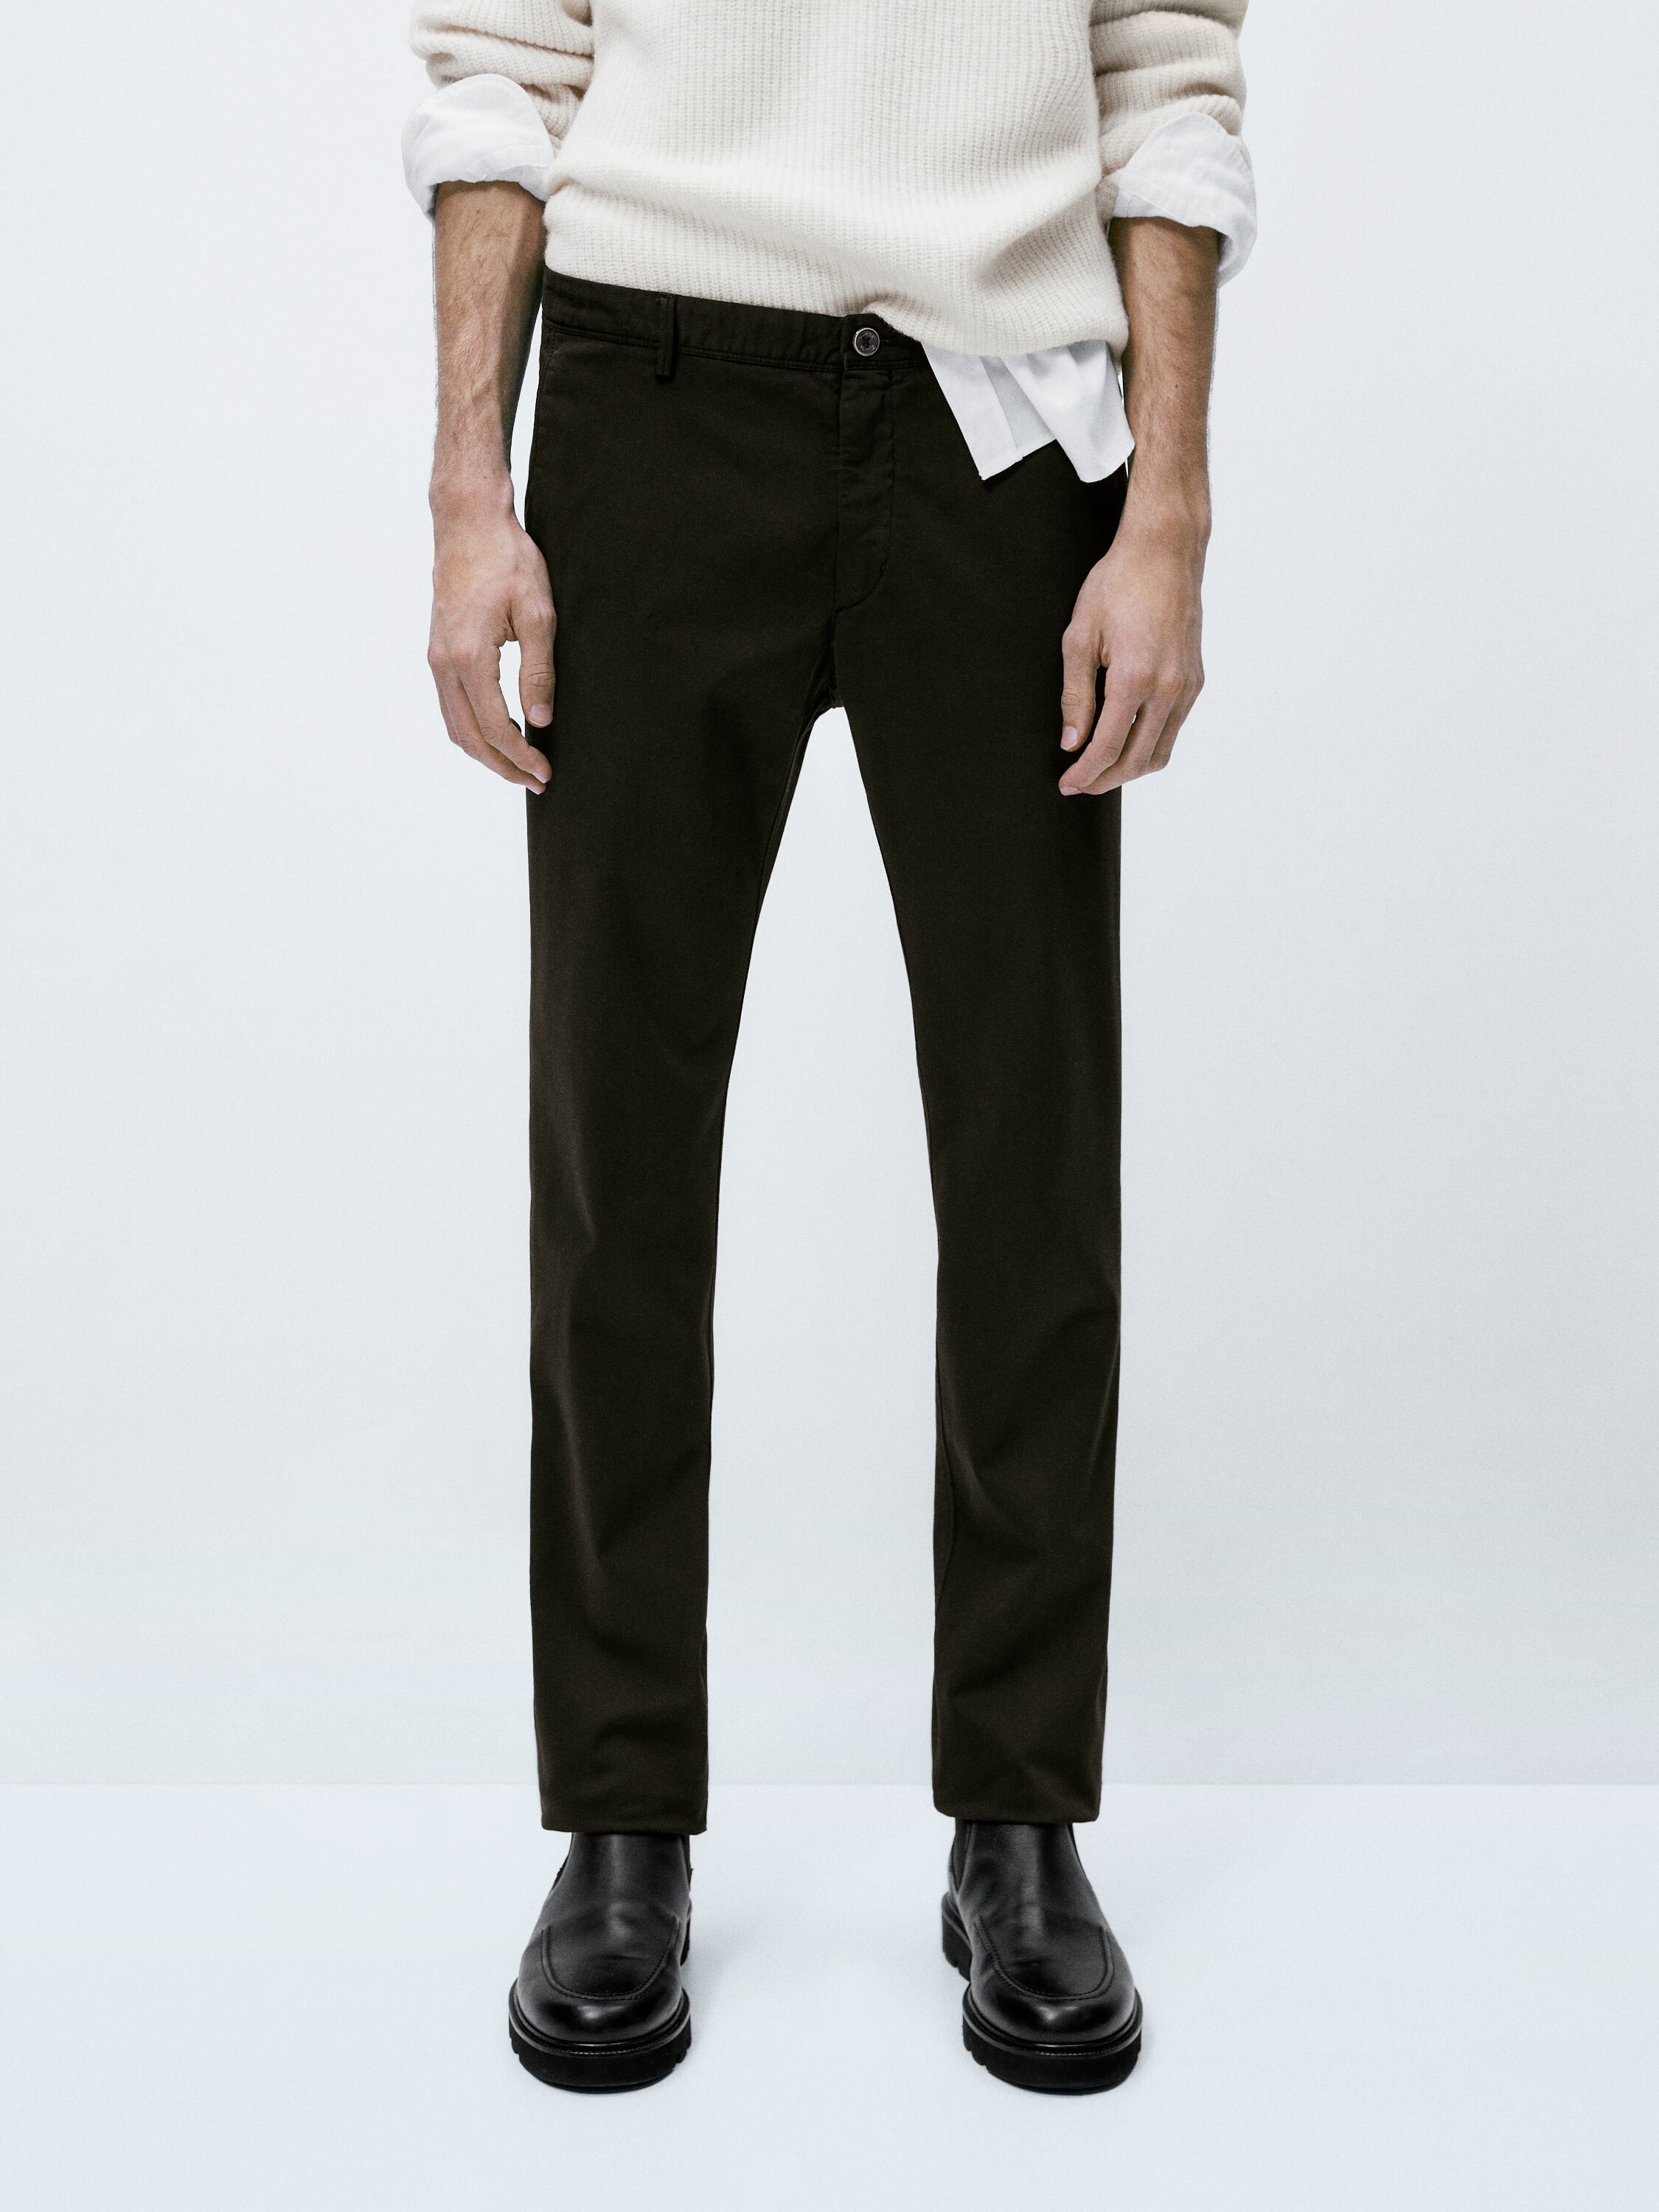 Regular fit cotton blend chino trousers